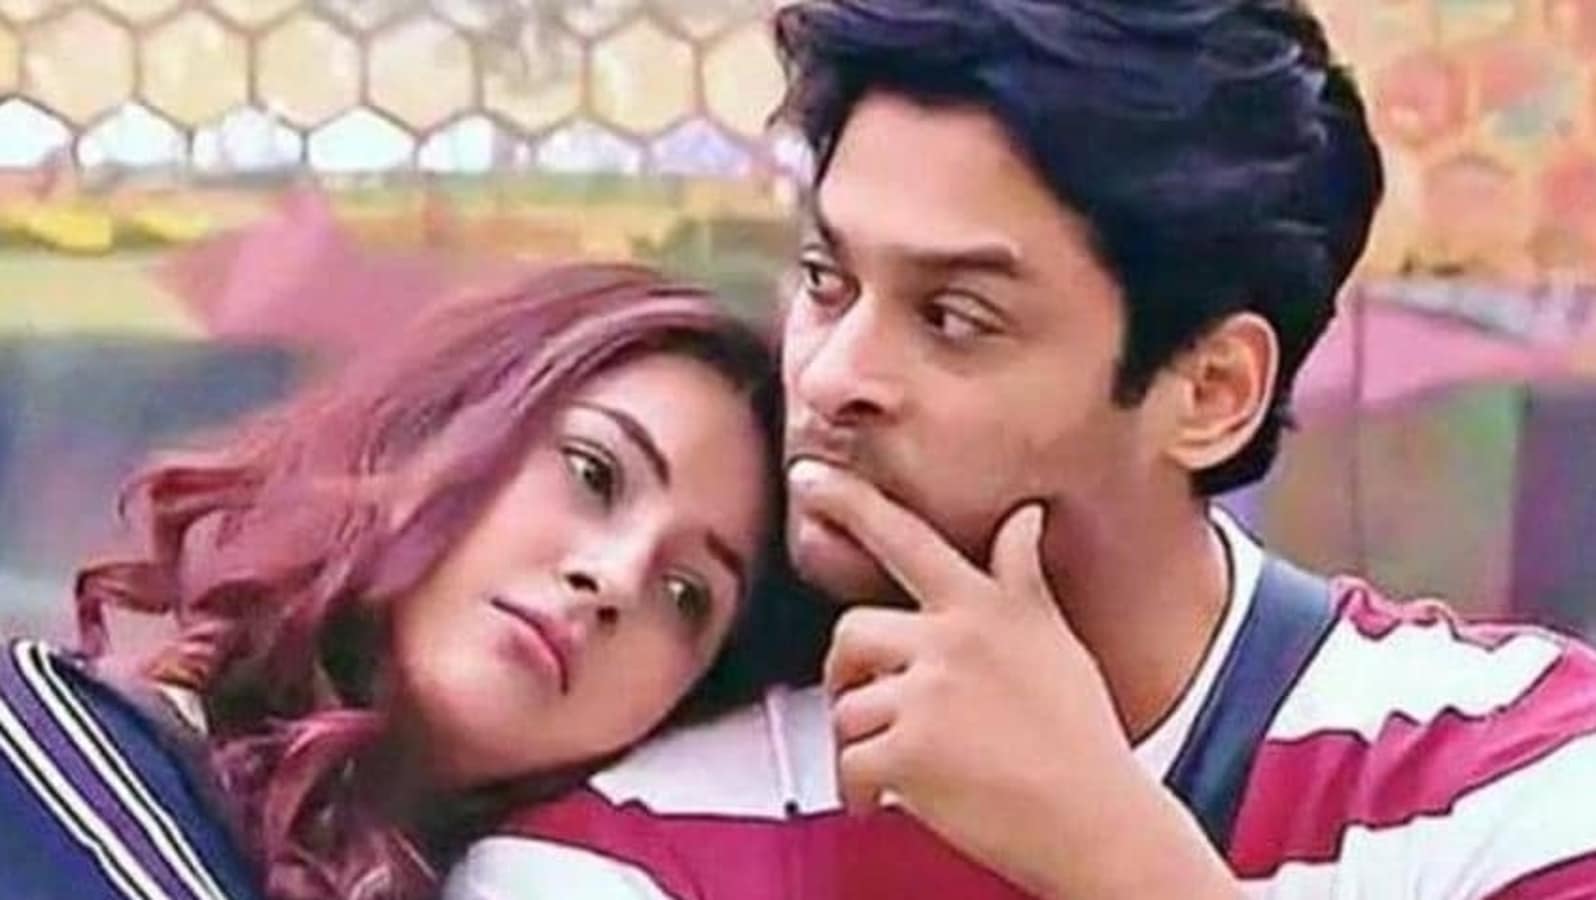 Shehnaaz Gill on Sidnaaz tag given by fans to her and Sidharth Shukla: ‘It was my everything, will stay with me forever’